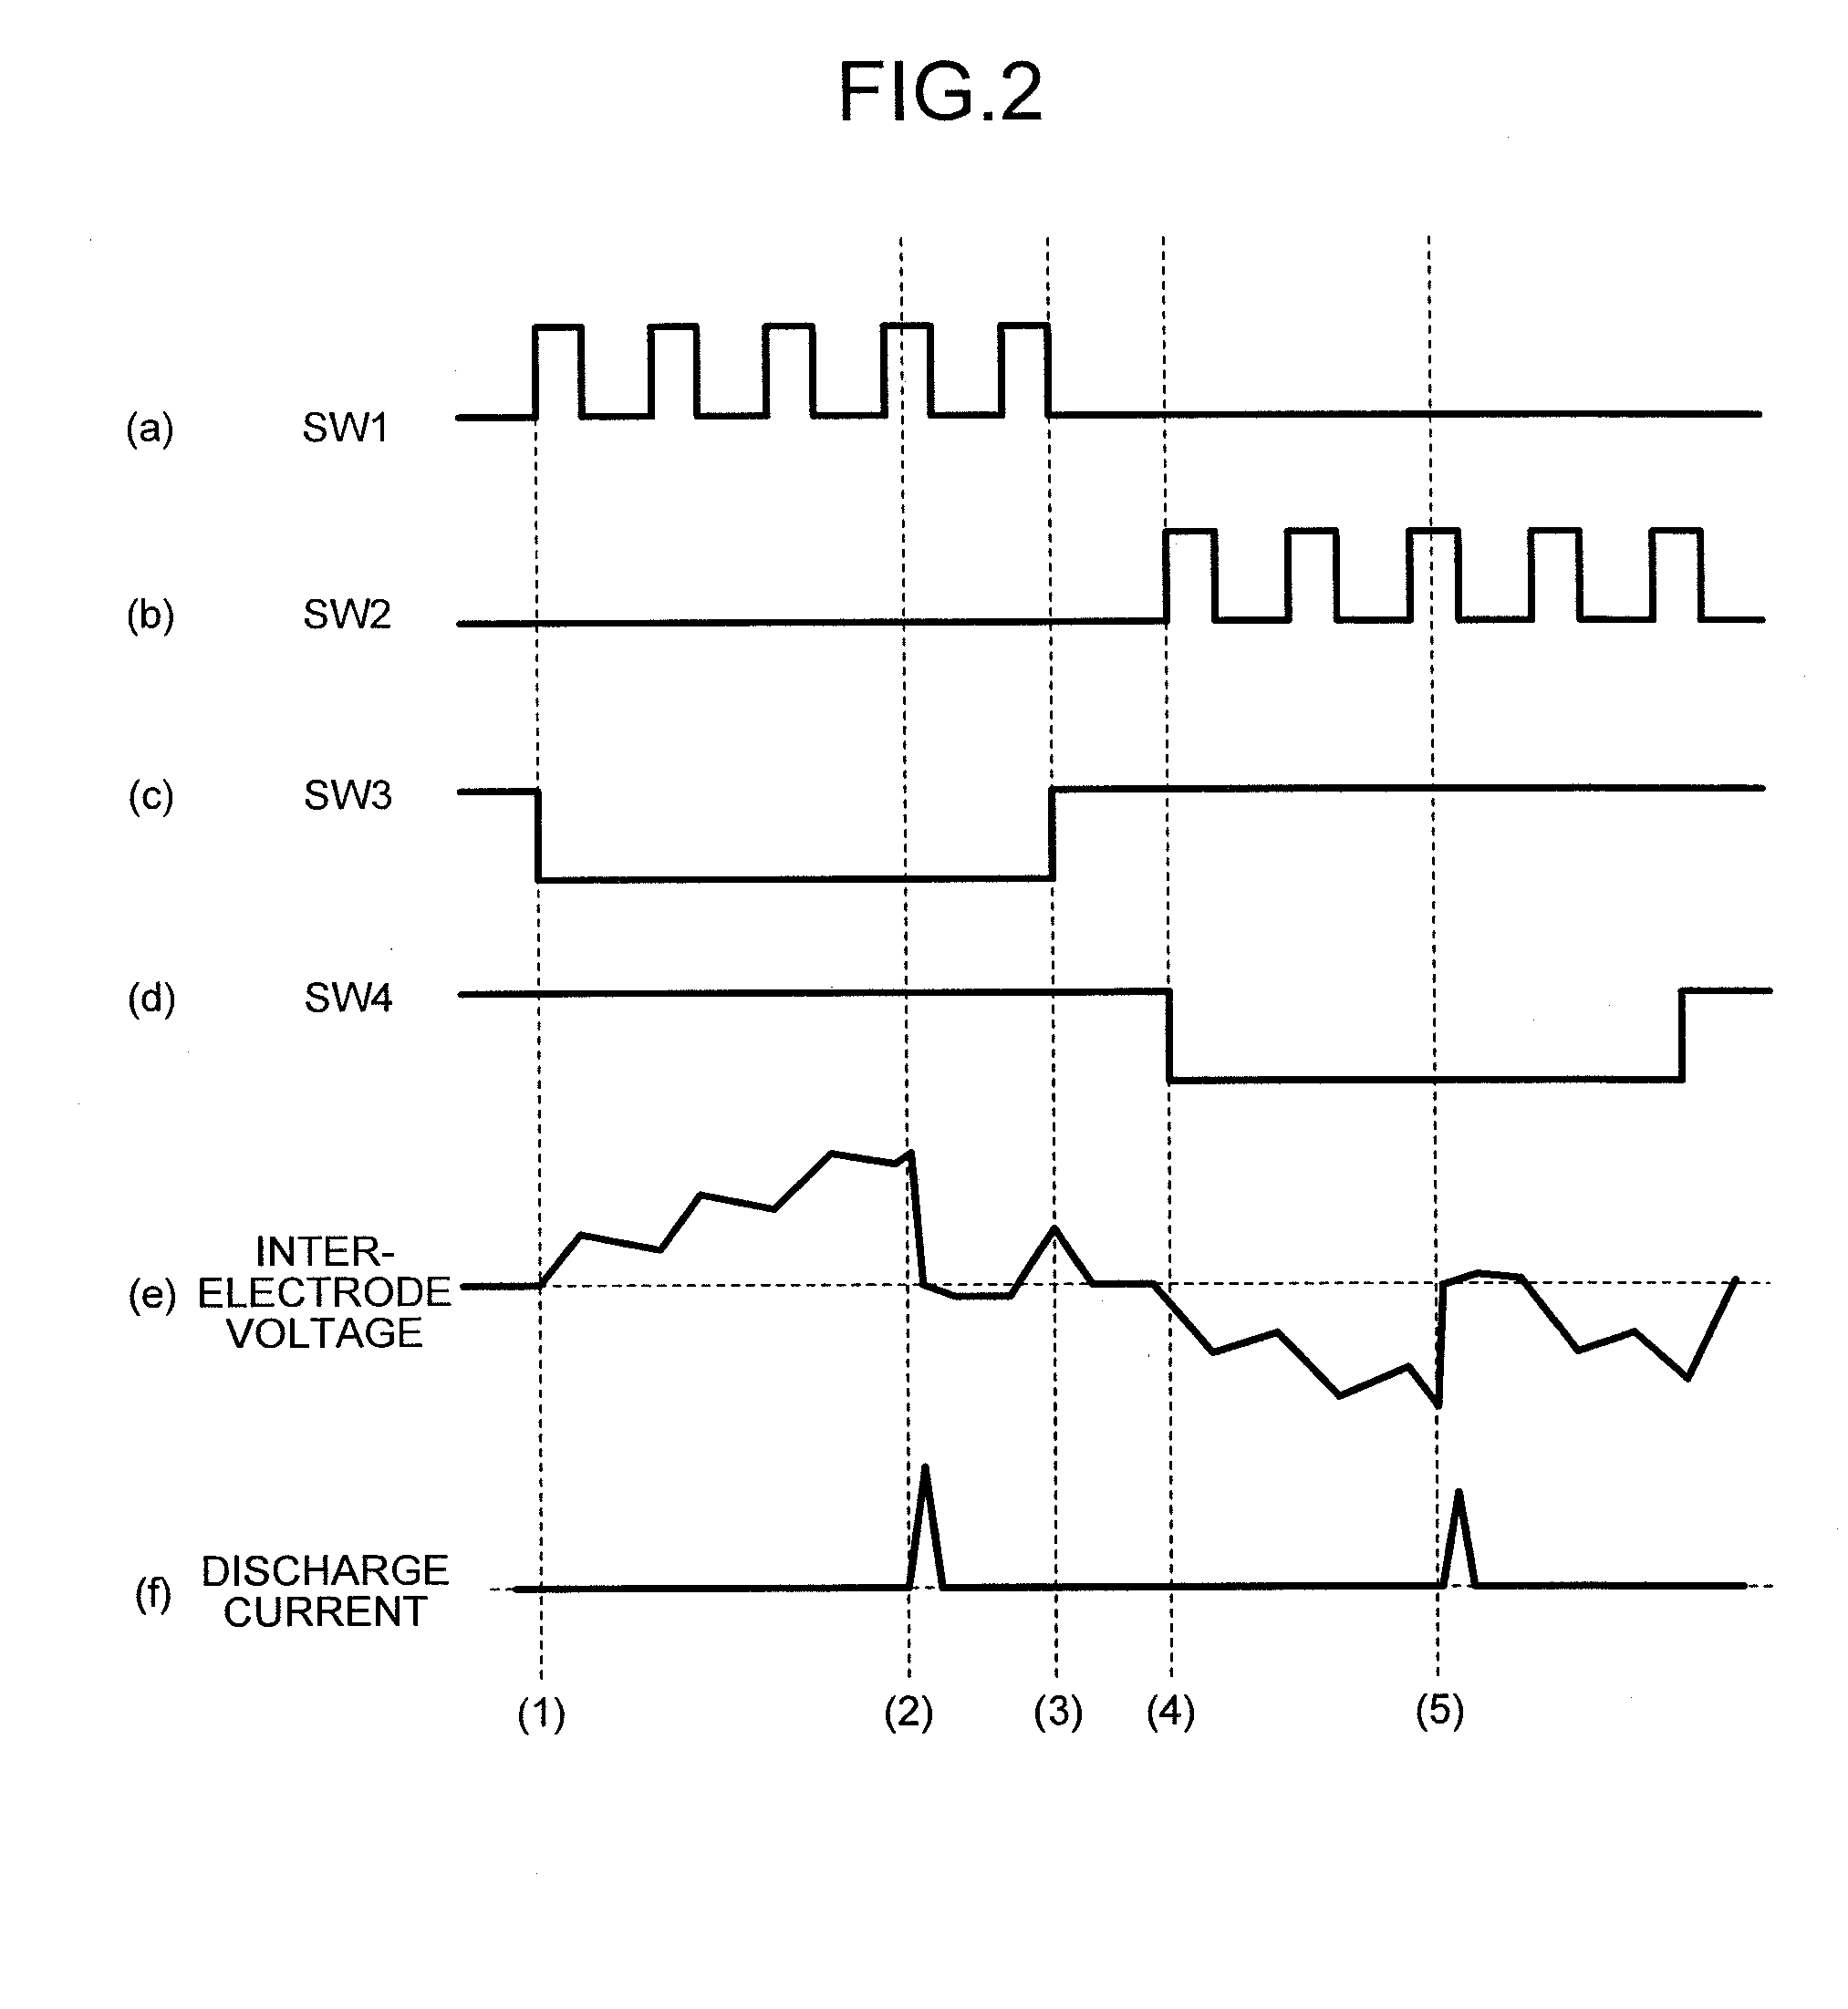 Electric discharge machining device